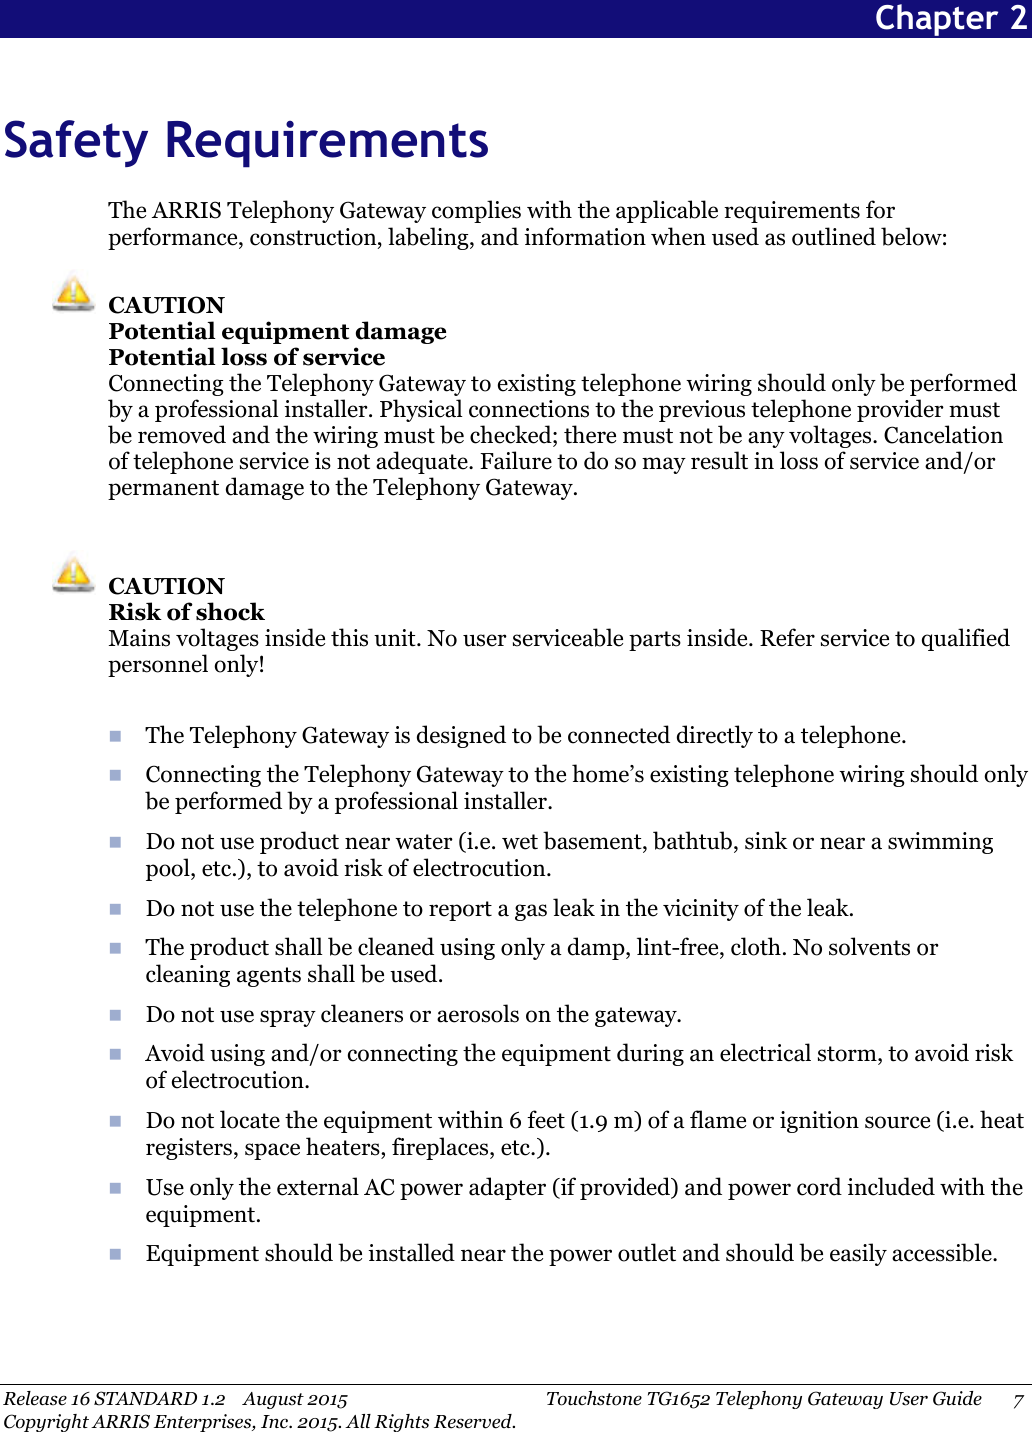 Release 16 STANDARD 1.2 August 2015 Touchstone TG1652 Telephony Gateway User Guide 7Copyright ARRIS Enterprises, Inc. 2015. All Rights Reserved.Chapter 2Safety RequirementsThe ARRIS Telephony Gateway complies with the applicable requirements forperformance, construction, labeling, and information when used as outlined below:CAUTIONPotential equipment damagePotential loss of serviceConnecting the Telephony Gateway to existing telephone wiring should only be performedby a professional installer. Physical connections to the previous telephone provider mustbe removed and the wiring must be checked; there must not be any voltages. Cancelationof telephone service is not adequate. Failure to do so may result in loss of service and/orpermanent damage to the Telephony Gateway.CAUTIONRisk of shockMains voltages inside this unit. No user serviceable parts inside. Refer service to qualifiedpersonnel only!The Telephony Gateway is designed to be connected directly to a telephone.Connecting the Telephony Gateway to the home’s existing telephone wiring should onlybe performed by a professional installer.Do not use product near water (i.e. wet basement, bathtub, sink or near a swimmingpool, etc.), to avoid risk of electrocution.Do not use the telephone to report a gas leak in the vicinity of the leak.The product shall be cleaned using only a damp, lint-free, cloth. No solvents orcleaning agents shall be used.Do not use spray cleaners or aerosols on the gateway.Avoid using and/or connecting the equipment during an electrical storm, to avoid riskof electrocution.Do not locate the equipment within 6 feet (1.9 m) of a flame or ignition source (i.e. heatregisters, space heaters, fireplaces, etc.).Use only the external AC power adapter (if provided) and power cord included with theequipment.Equipment should be installed near the power outlet and should be easily accessible.